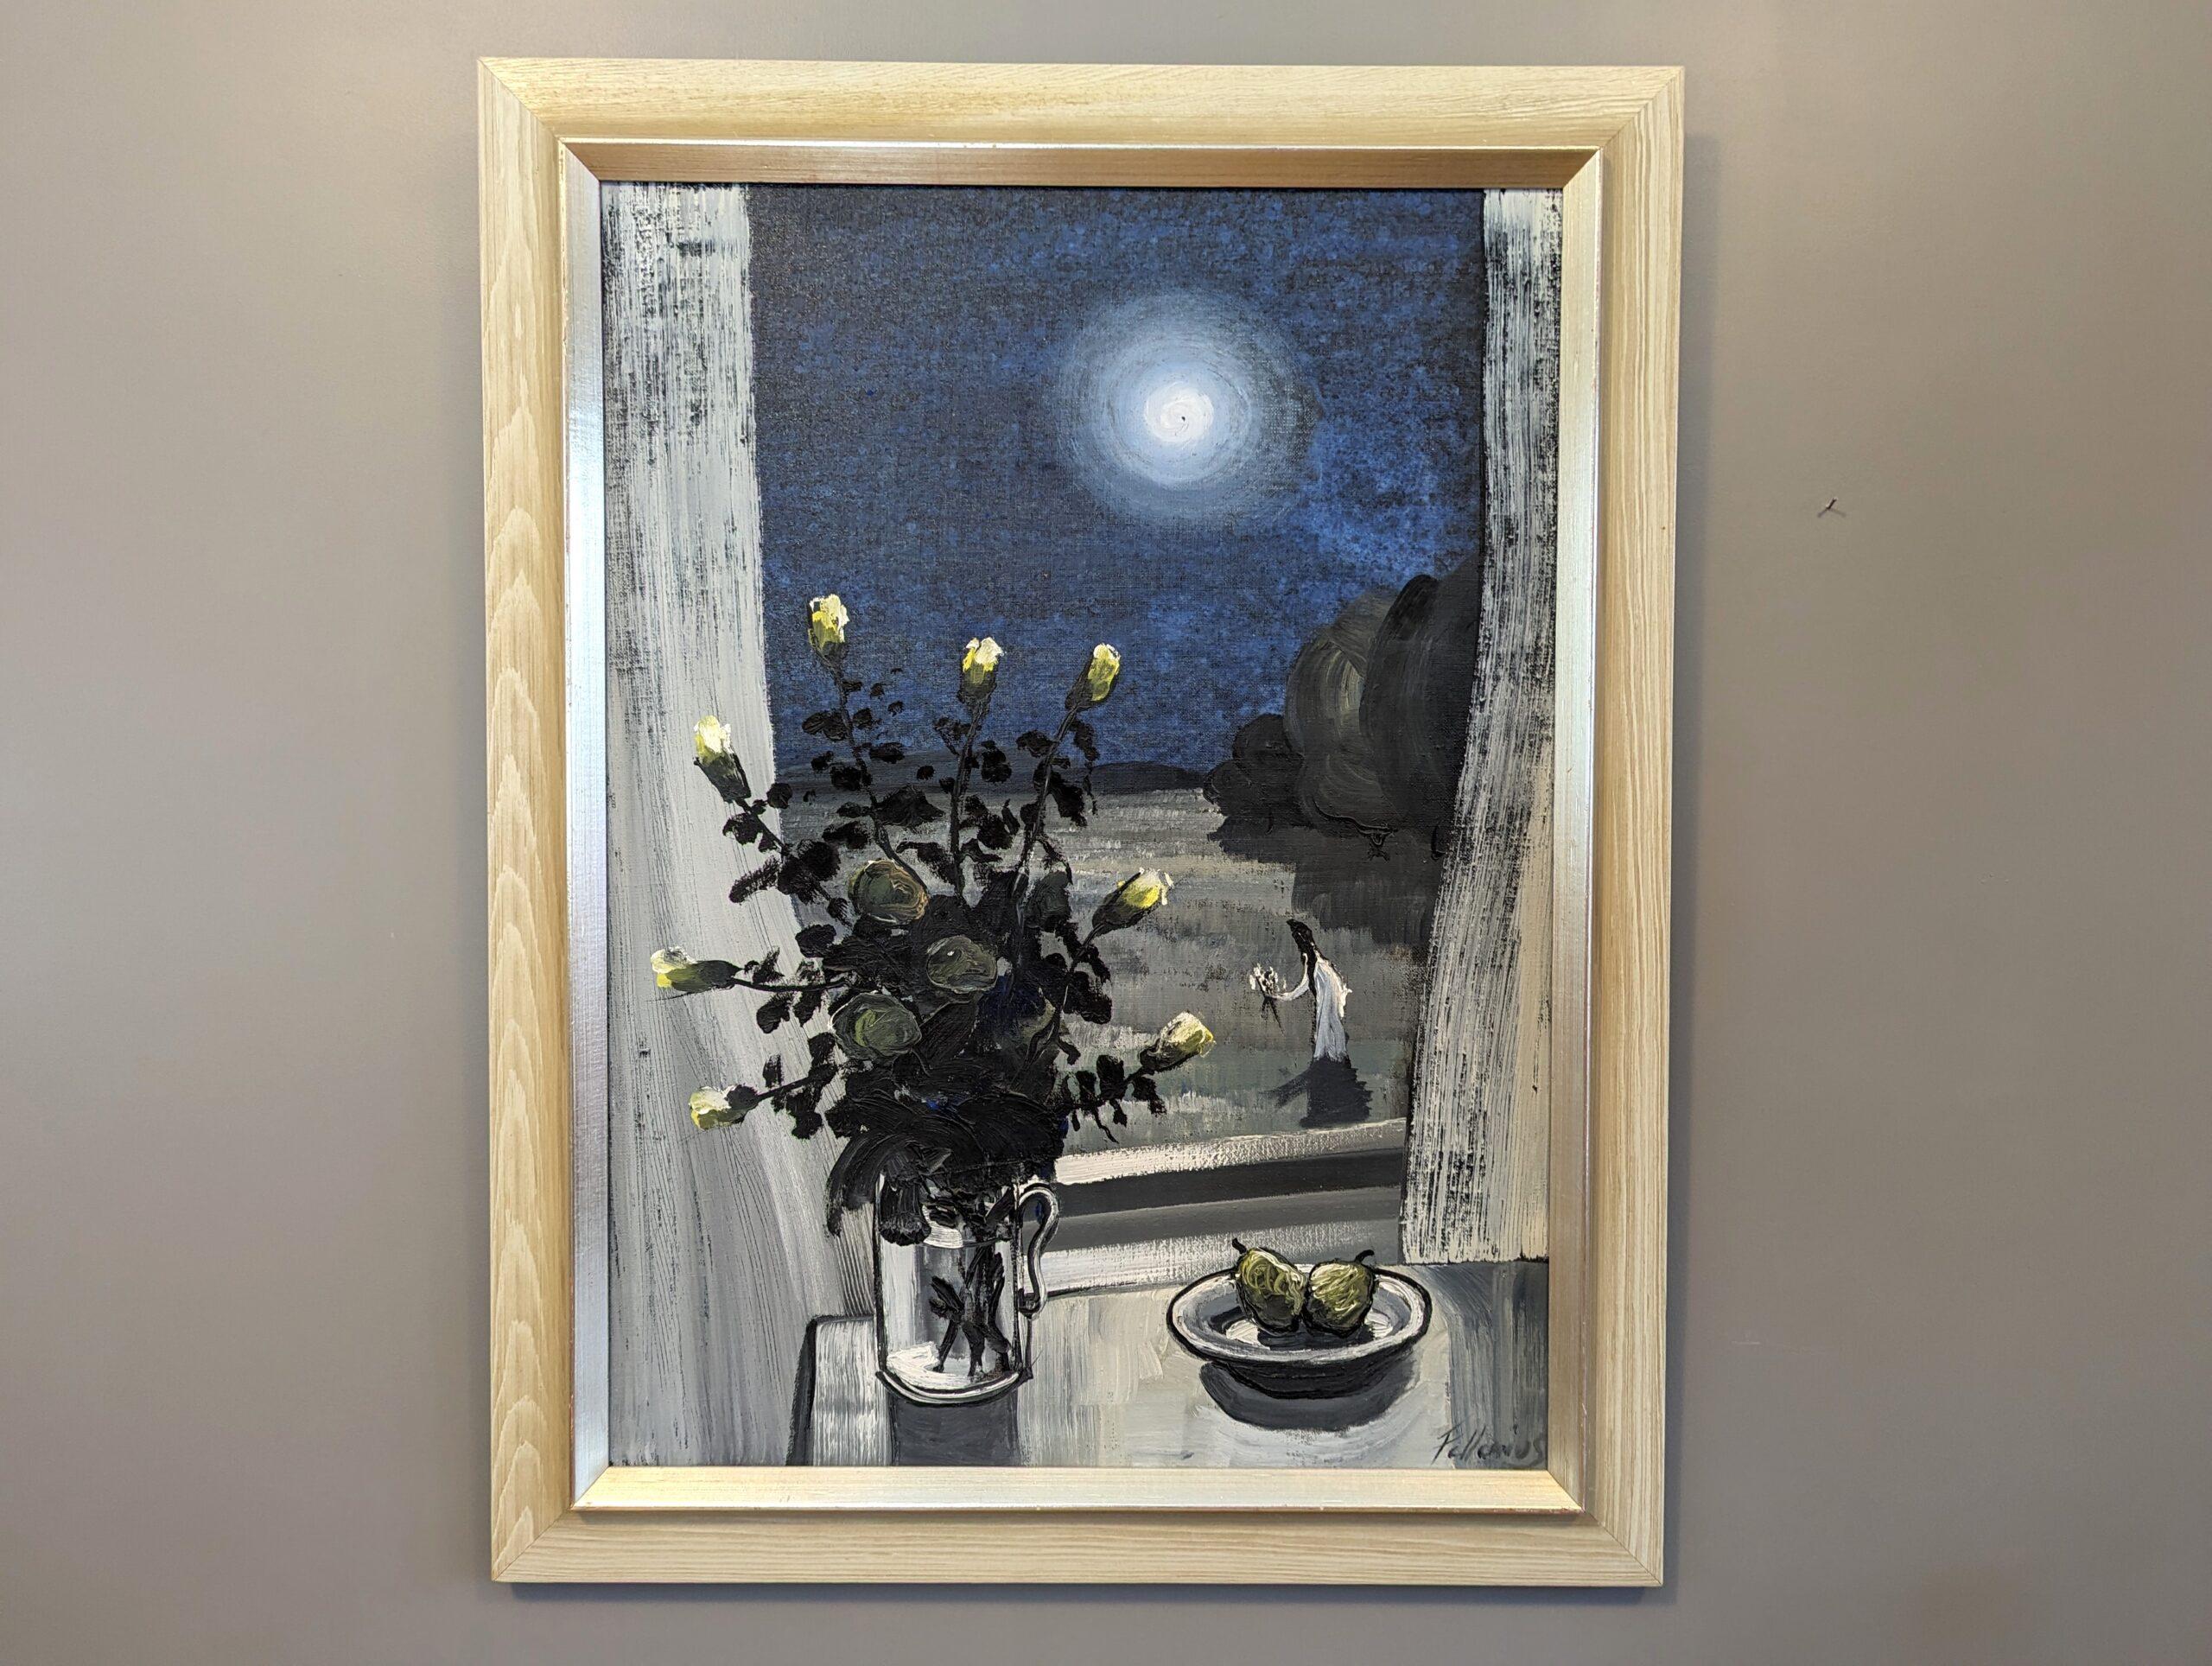 MIDNIGHT BLUES
Size: 59 x 82 cm (including frame)
Oil on Canvas

A large and atmospheric mid-century composition captures the enchanting ambiance of nightfall, executed in oil onto canvas.

Resting upon a window sill is with a vase of delicate